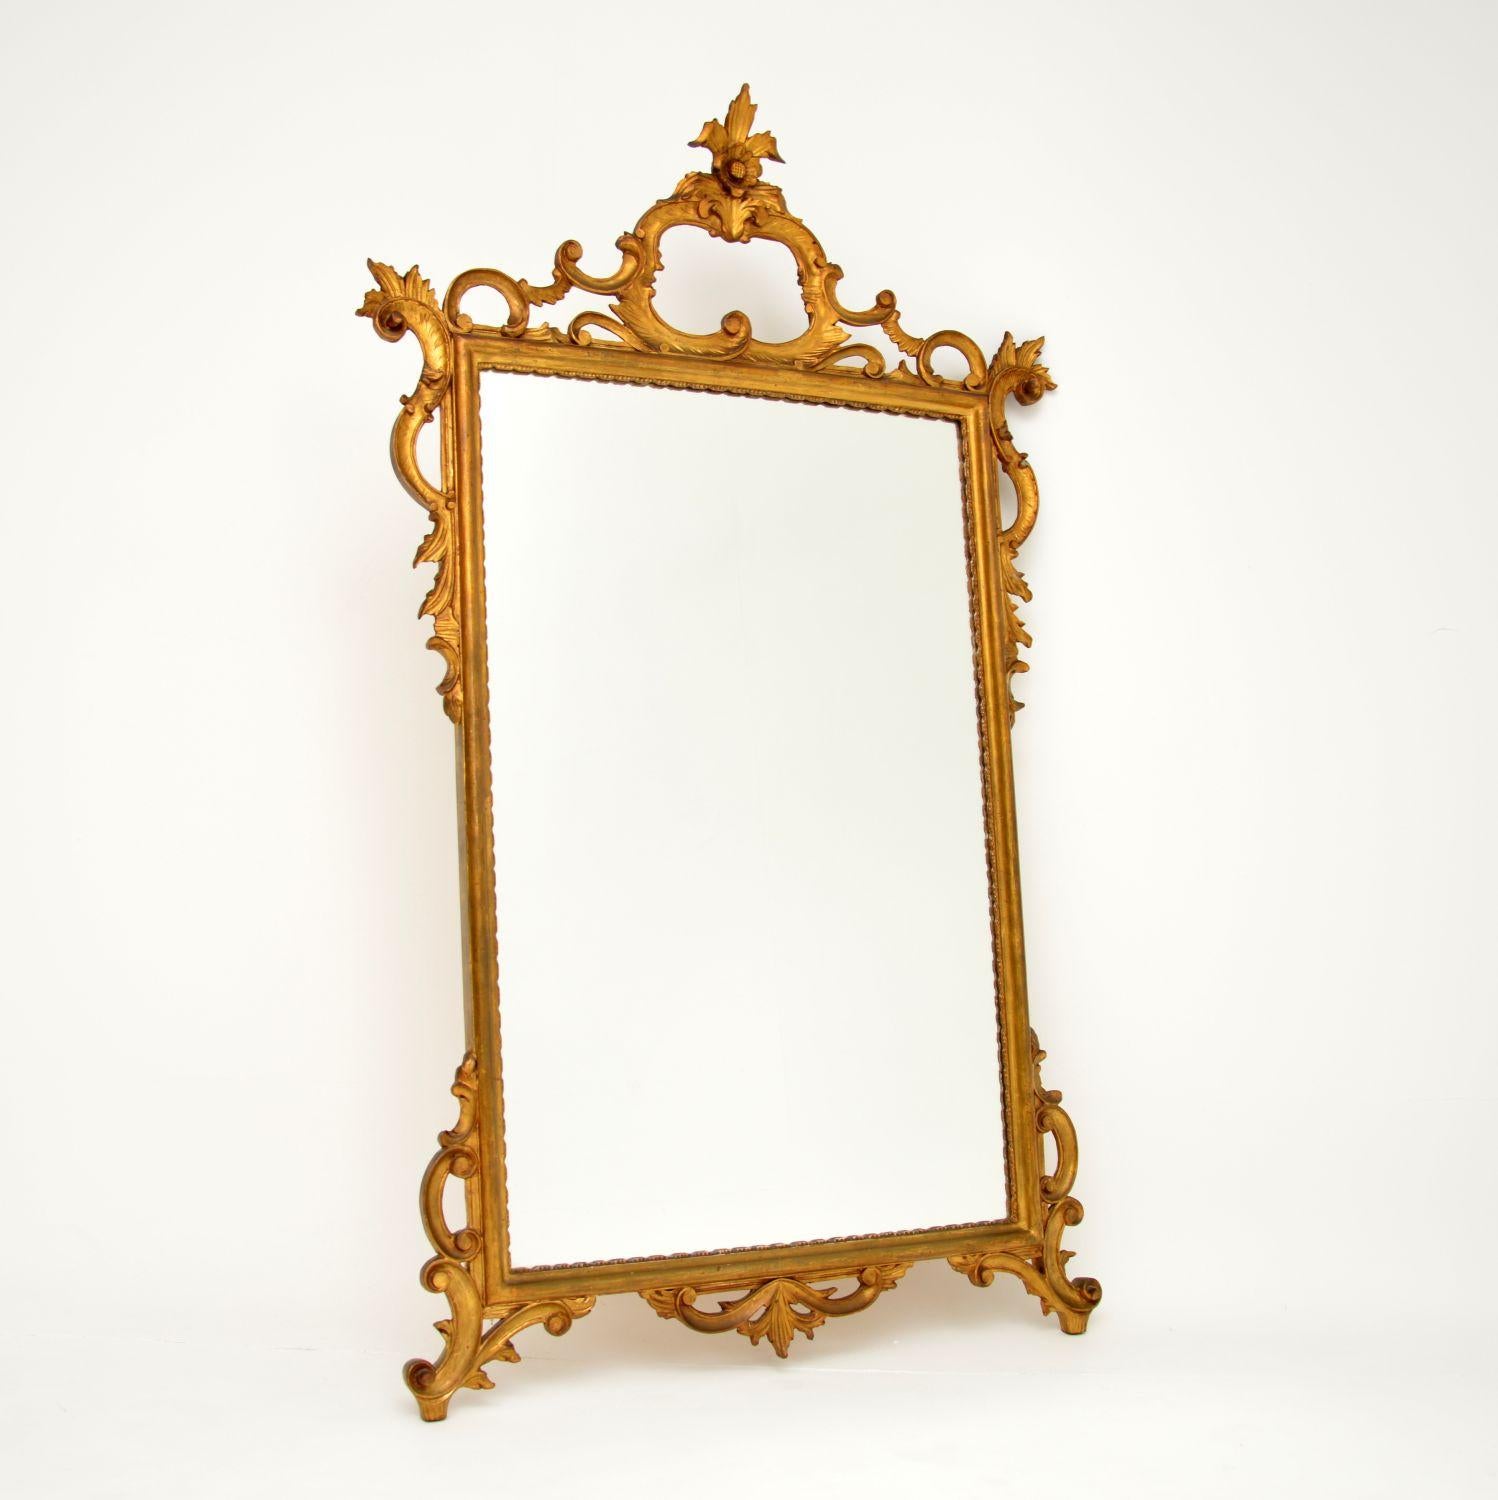 A beautiful and impressive large antique Italian gilt wood mirror. This was made in Italy and dates from around the 1950’s.

It is a fantastic size and is of amazing quality. The gilt wood has gorgeous carving in the rococo style, with scrolled,